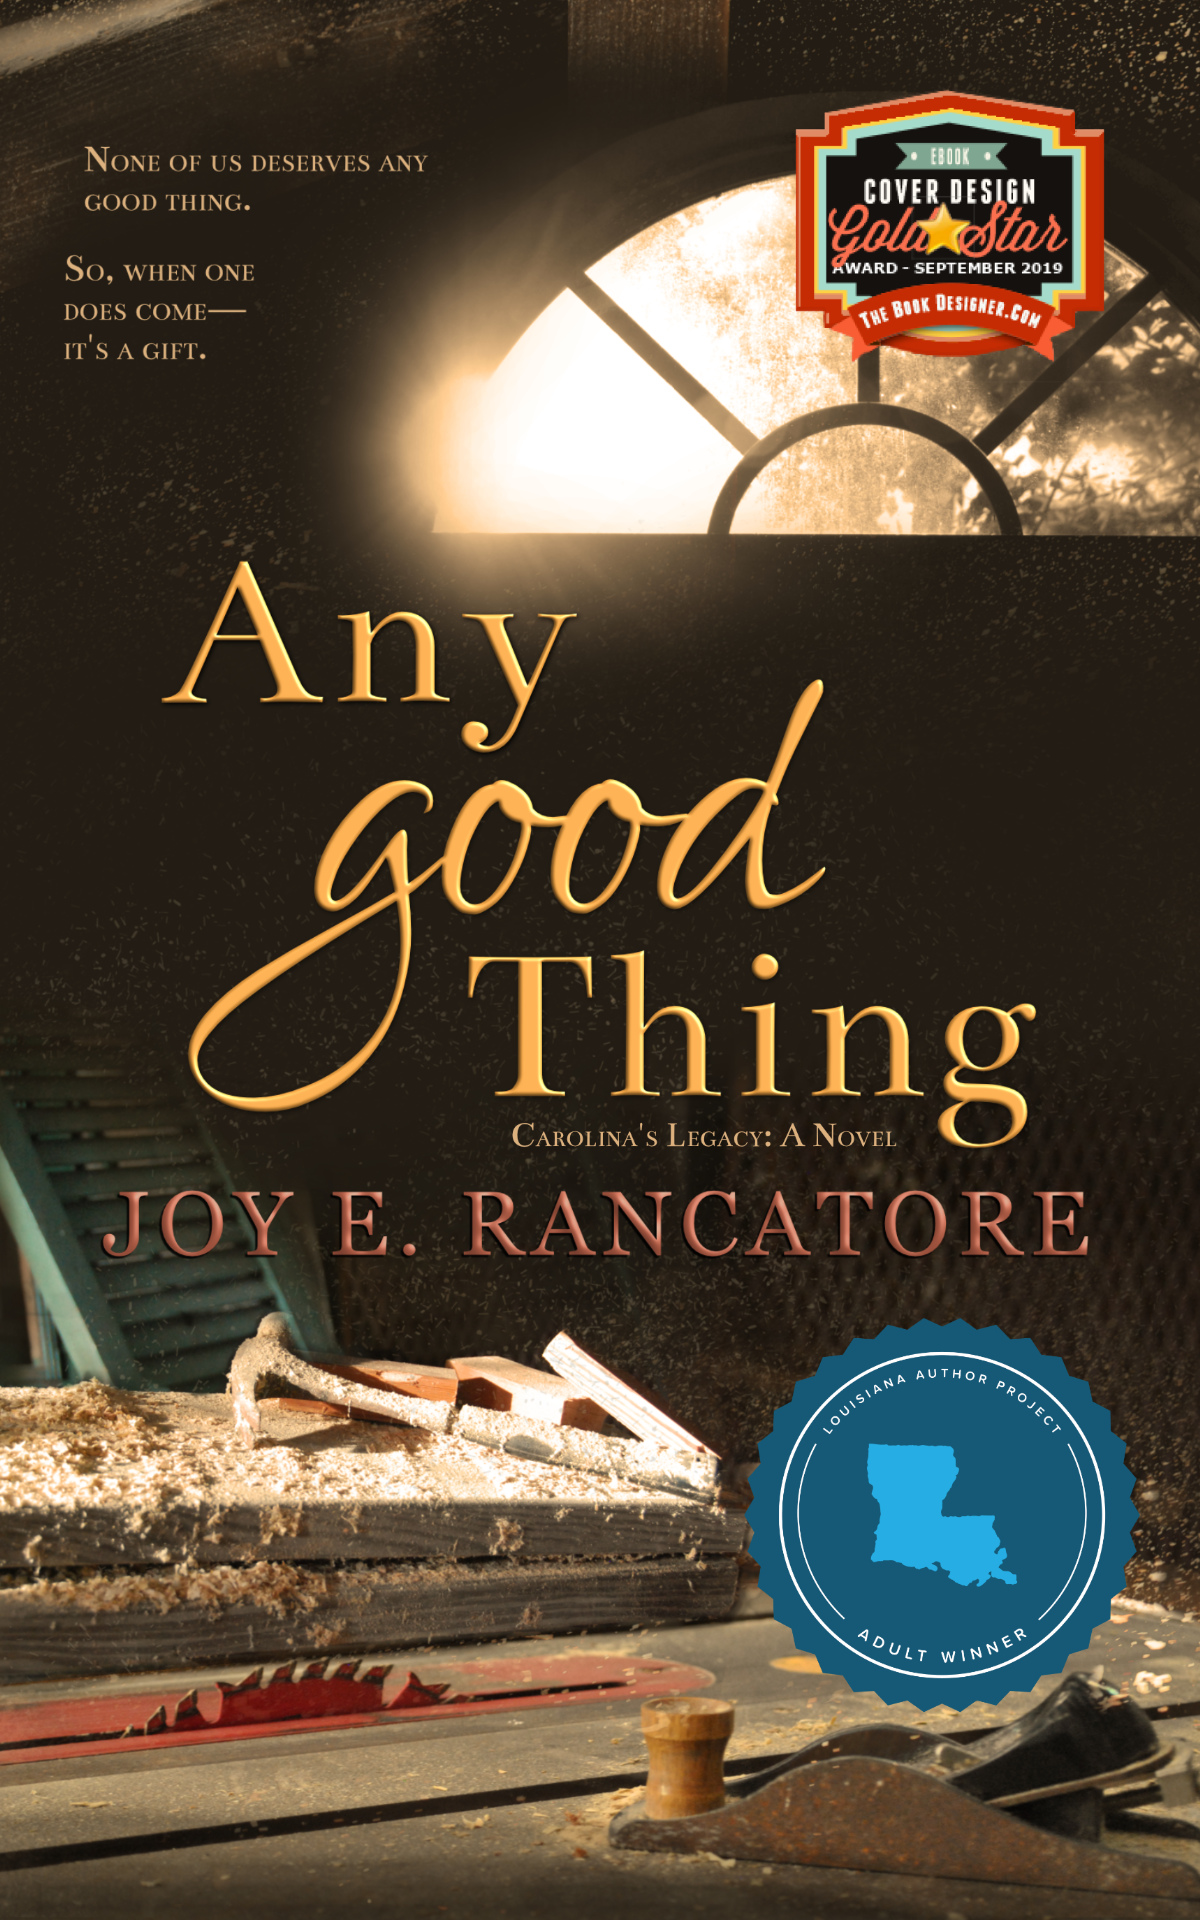 Any Good Thing by Joy E. Rancatore, 2022 Indie Author Project Winner for Louisiana